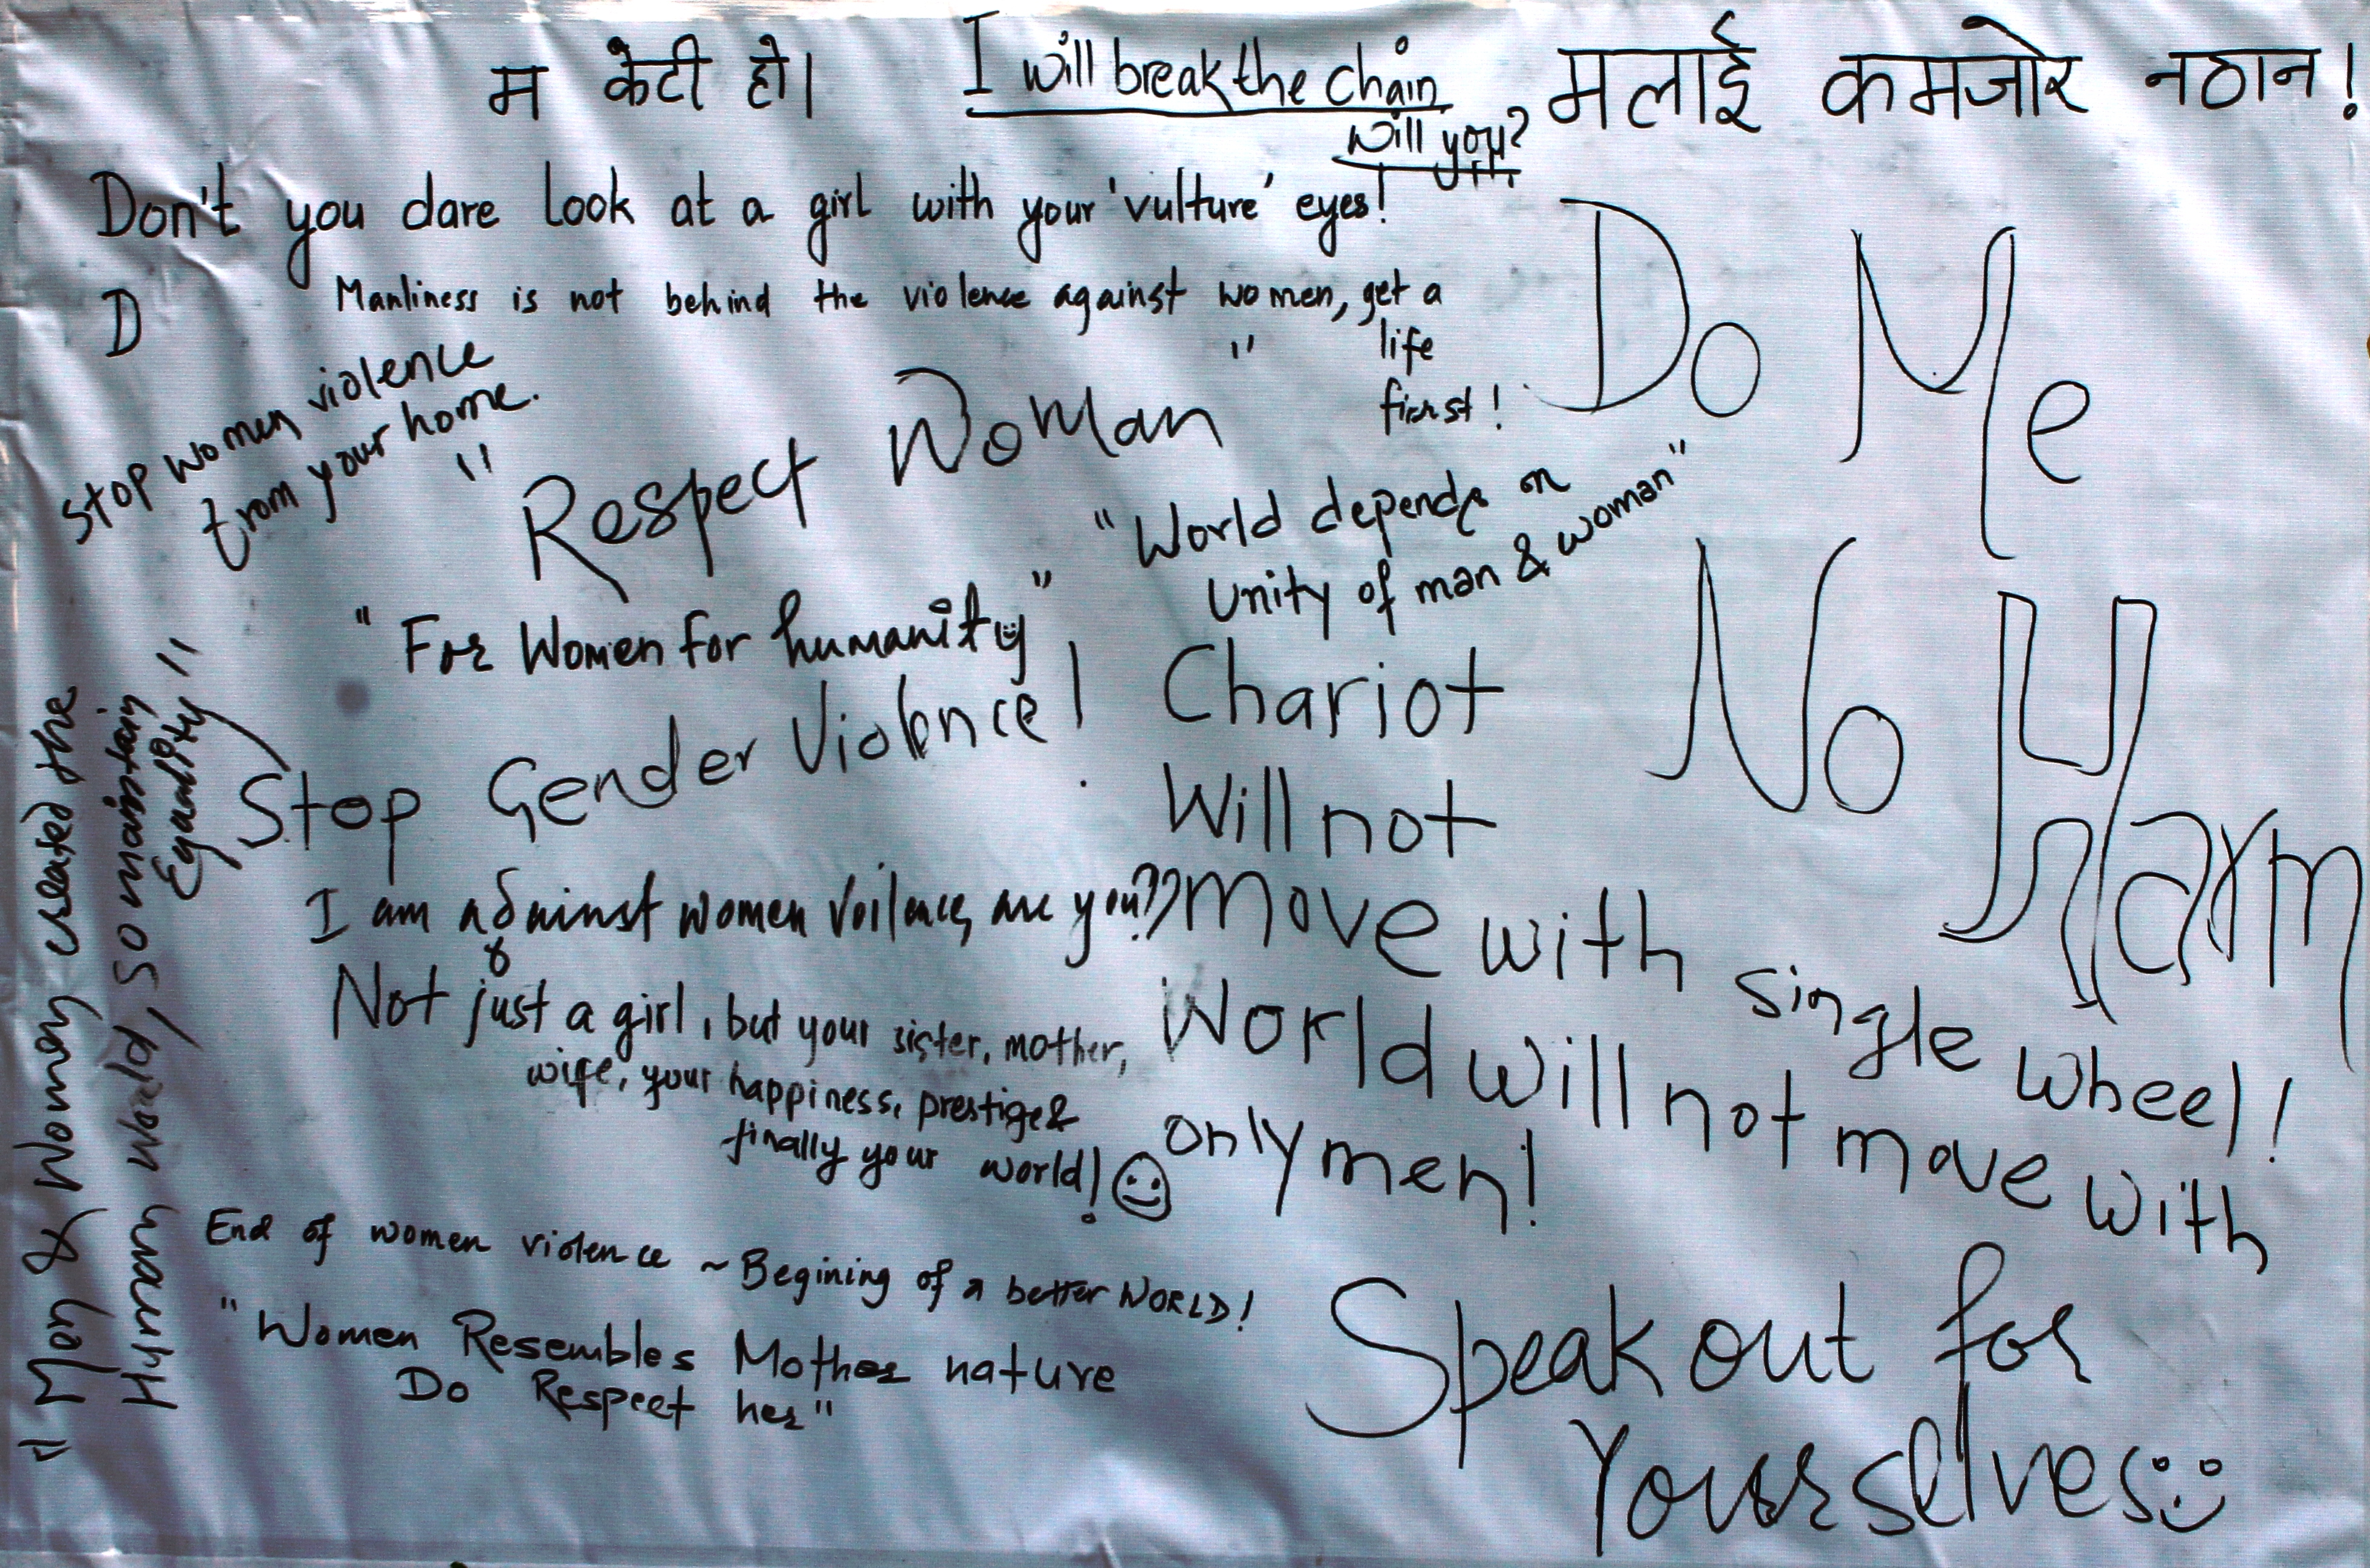 Notes by medical students against VAW